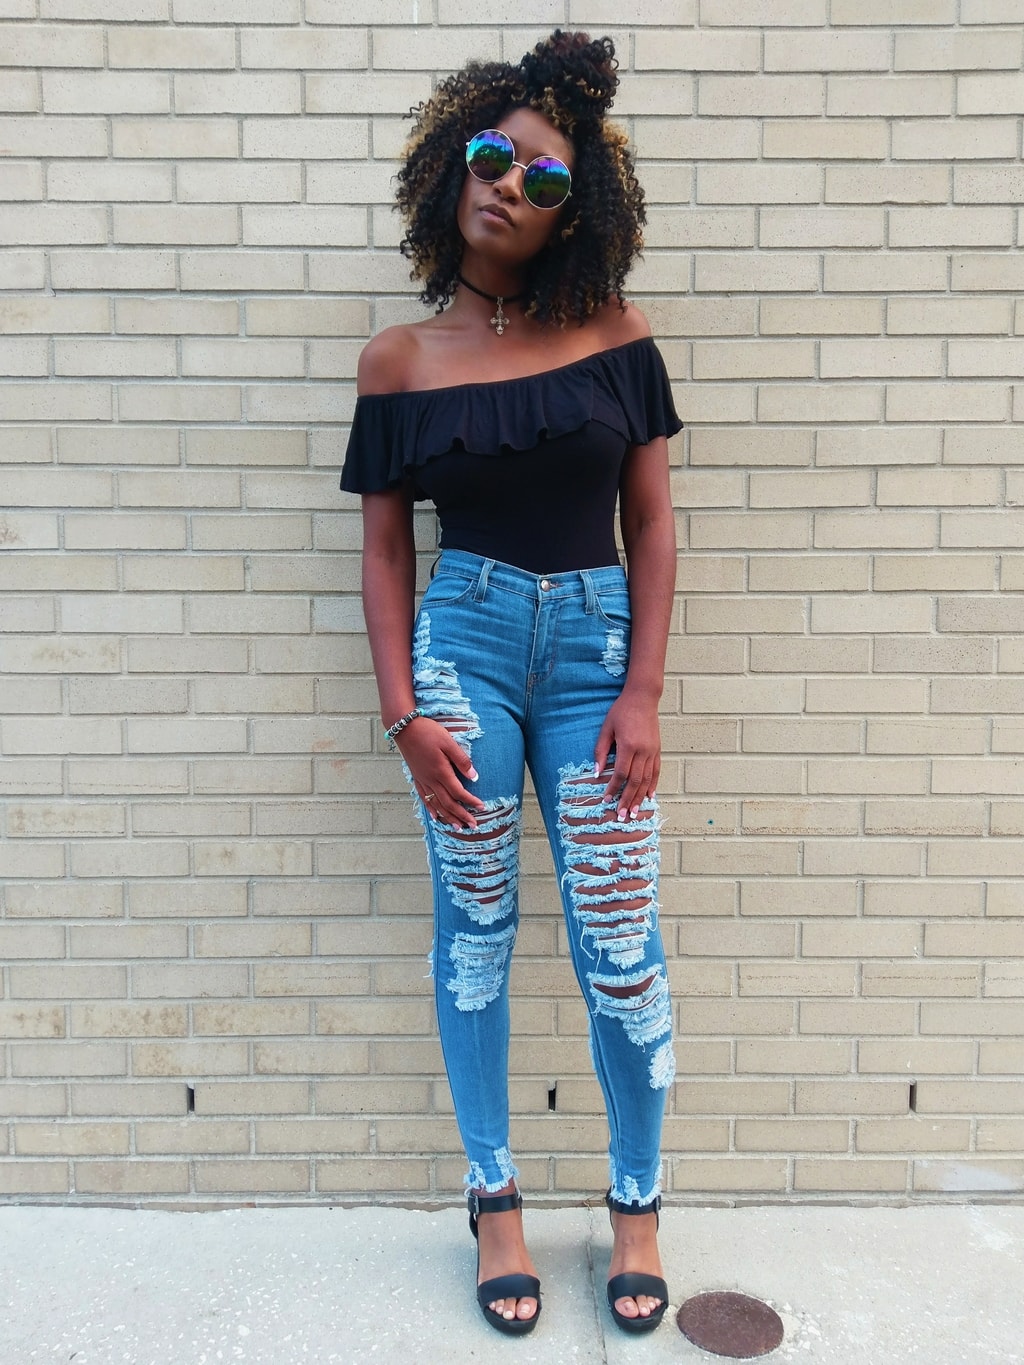 Payton, a University of South Florida student, rocks an 80-inspired look. Her off-the-shoulder black ruffled bodysuit tucks into her ultra shredded light-wash denim jeans. She polishes off her look with a cross choker necklace and ultra reflective round sunglasses.